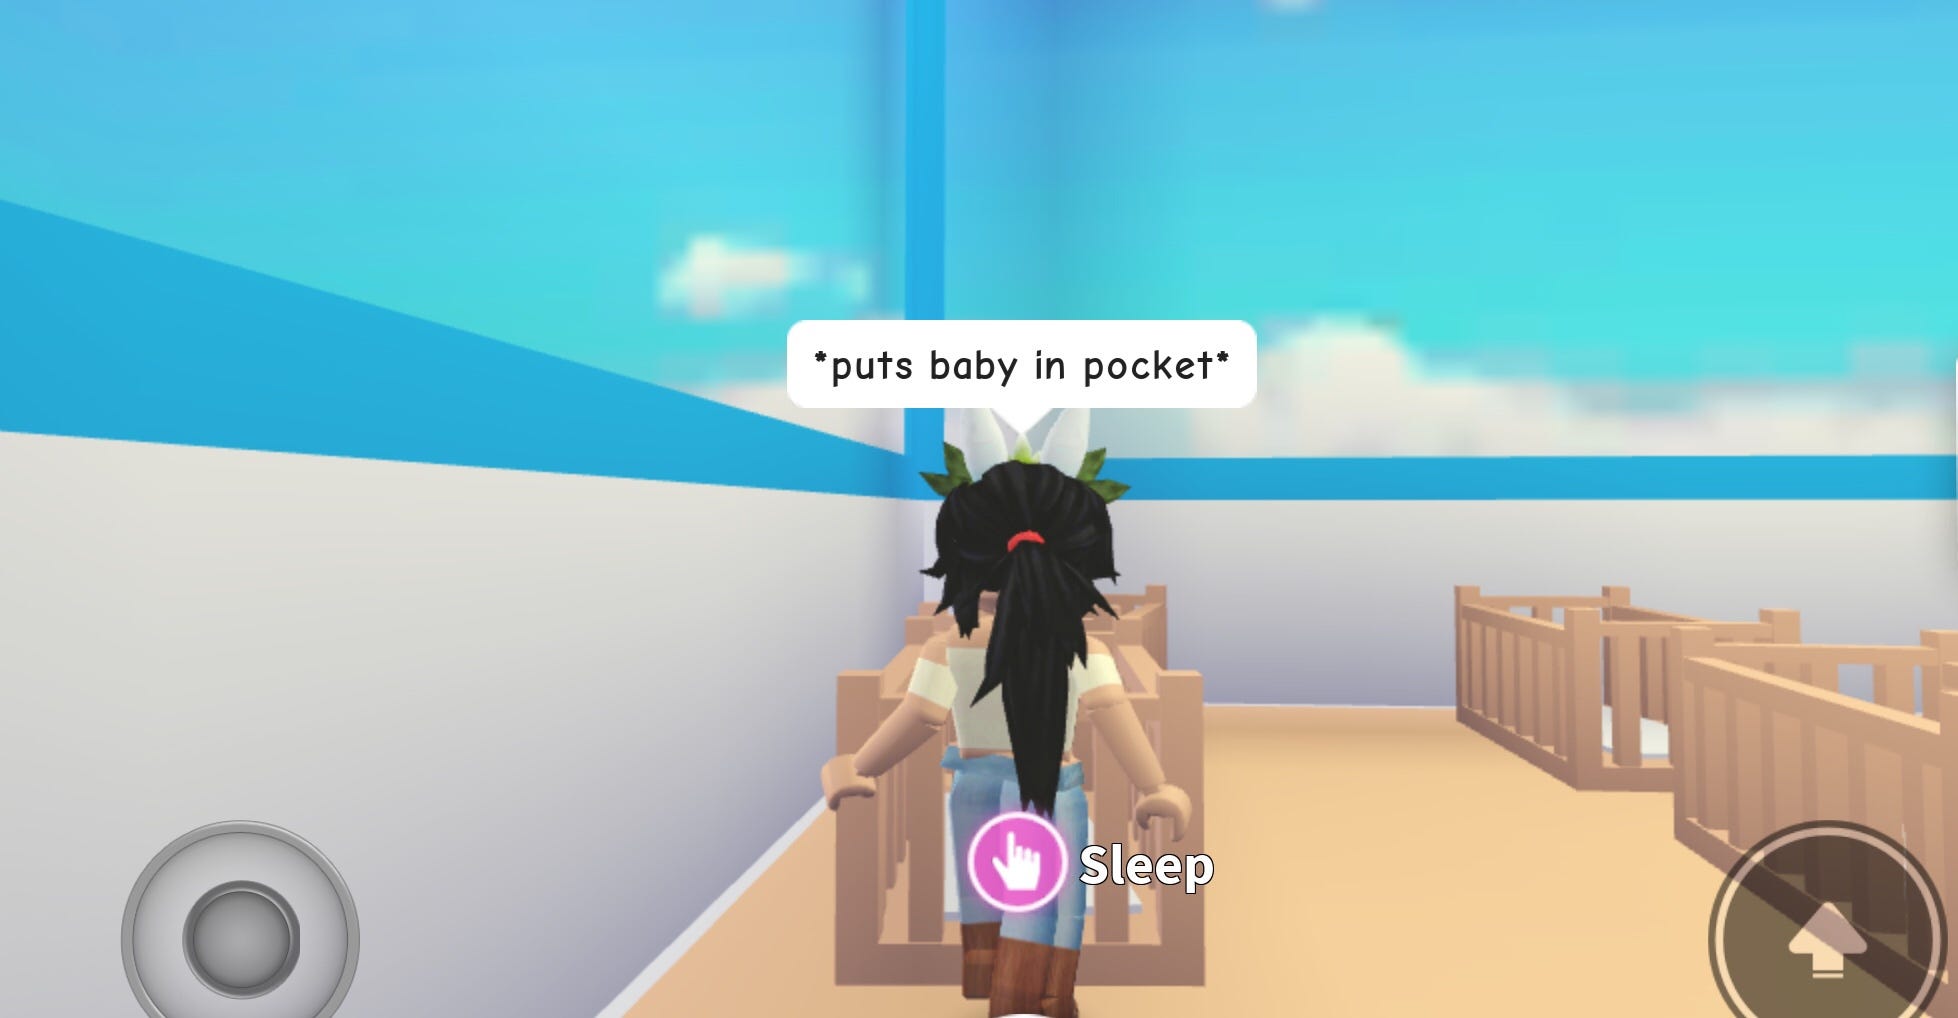 Recreated Made Up Roblox Memes Hope It Was Funny For You By Porcupine212 Blox Central Medium - roblox meme puts baby in pocket